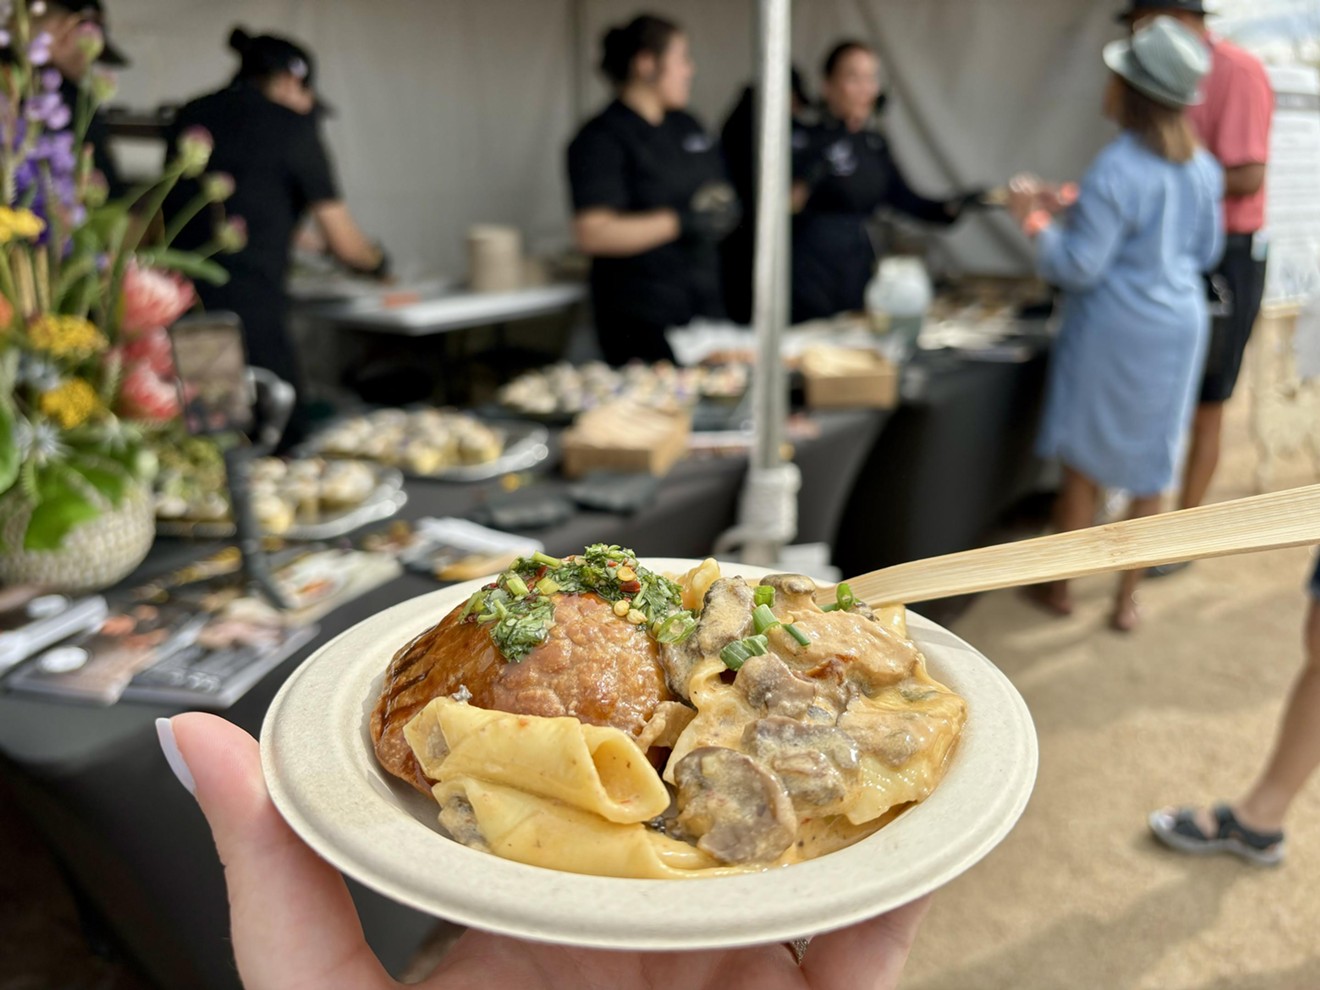 The Devour Culinary Classic took over the Desert Botanical Gardens for a weekend packed with food and drinks. Sedona chef Lisa Dahl showed off her culinary prowess with empanadas, pasta and flan.